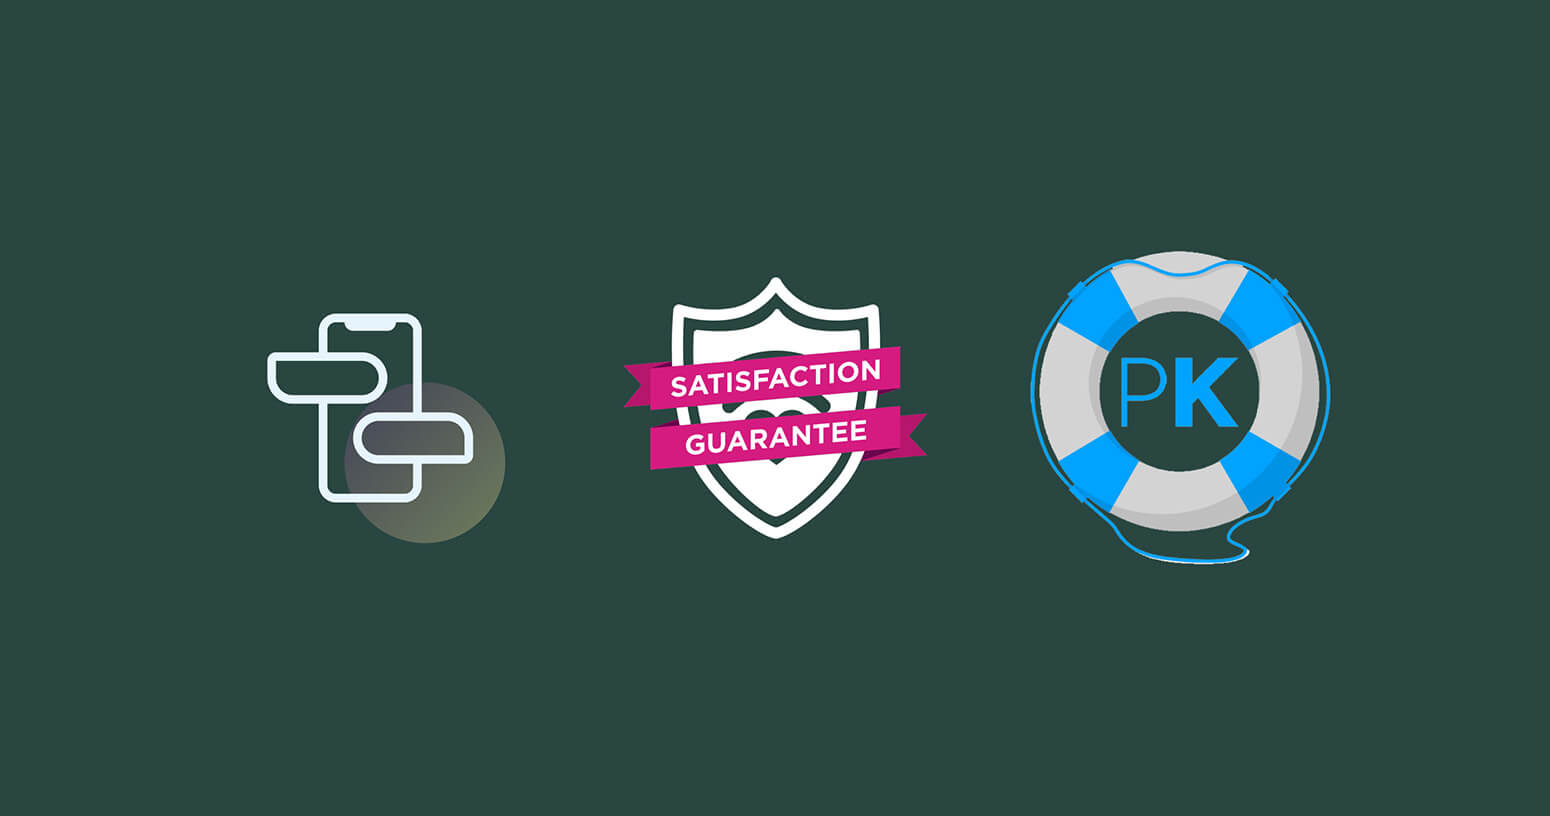 3 icons - a phone with chat bubbles for K Health, a satisfaction guarantee badge for Pretty Instant, and a life preserver support icon for Presskit.to